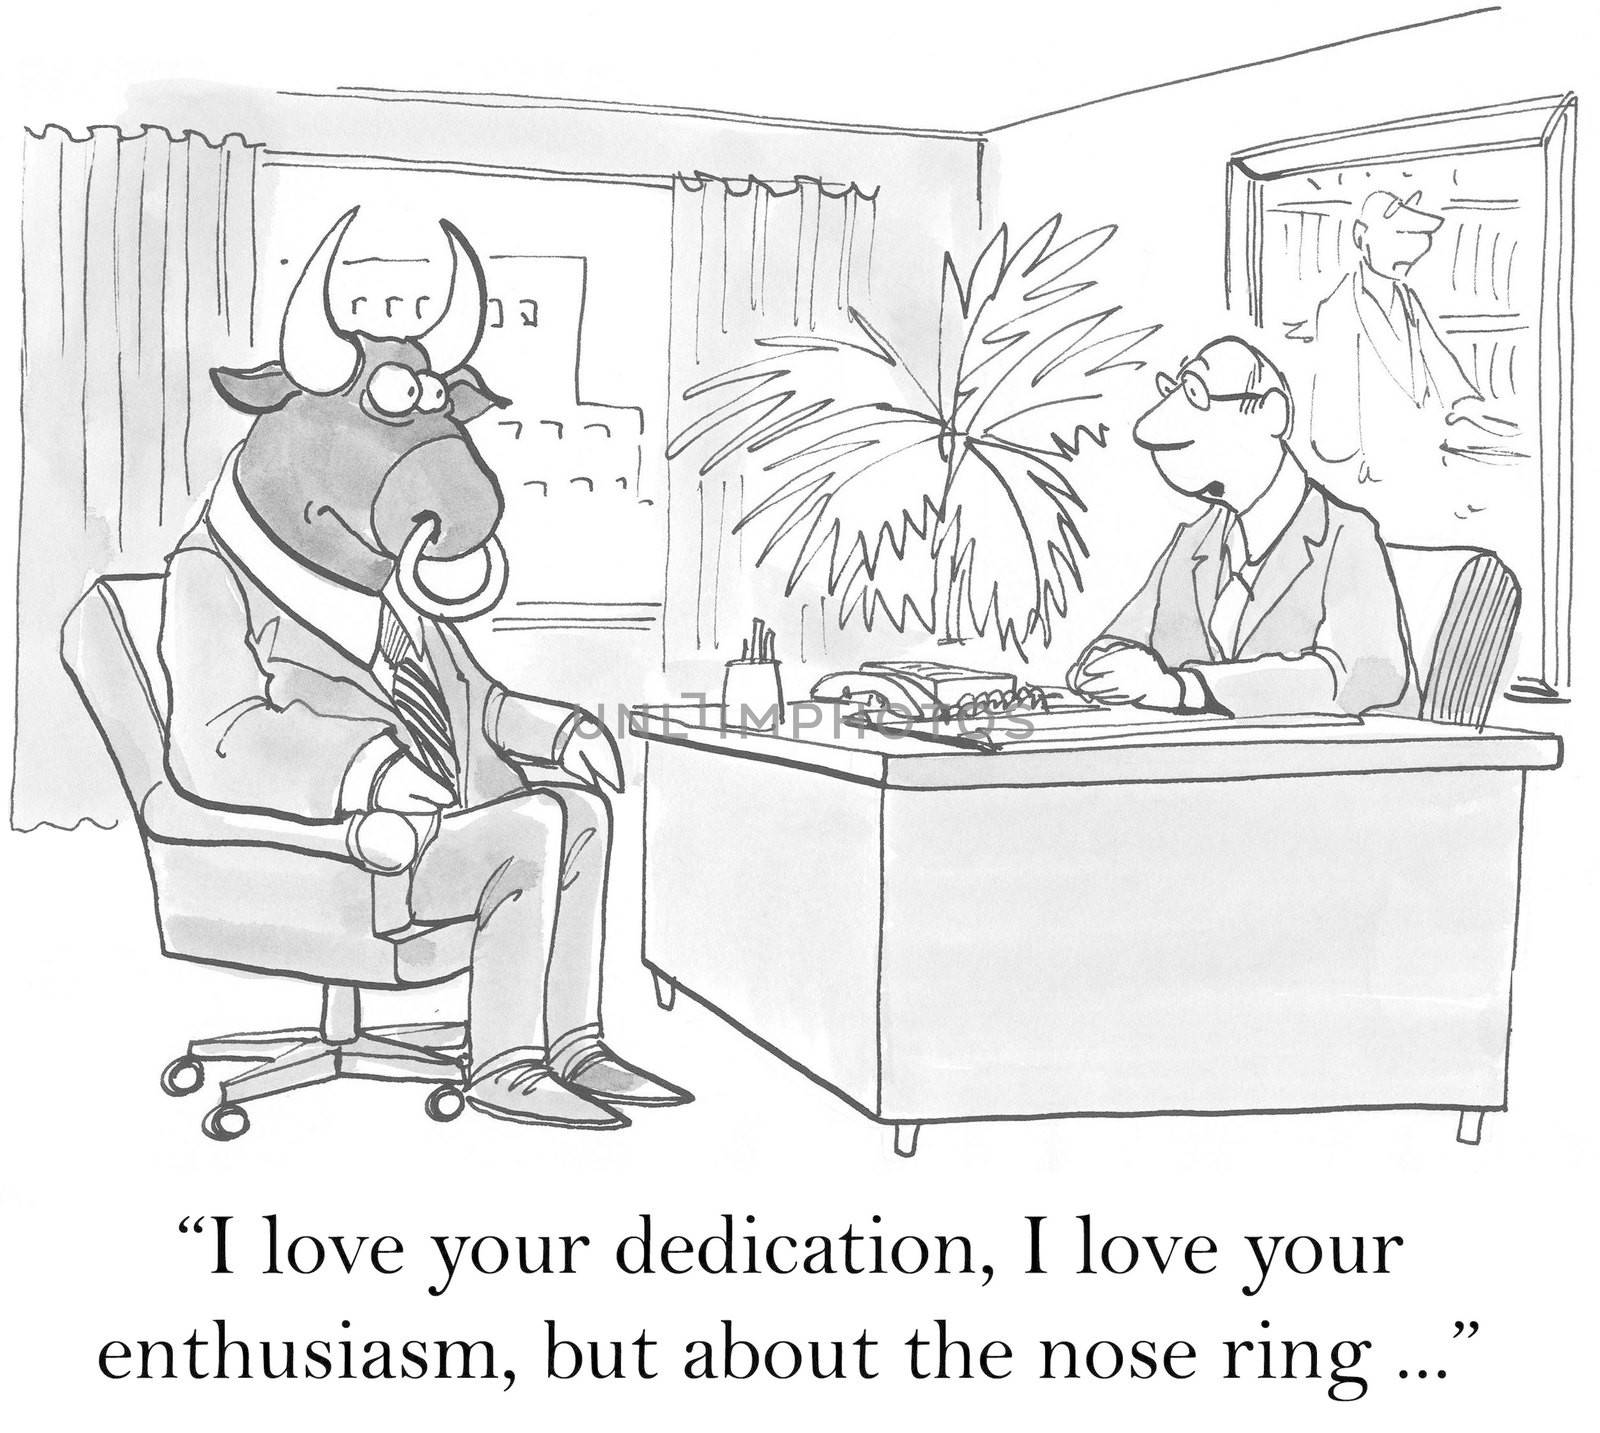 "I love your dedication, I love your enthusiasm, but about the nose ring..."